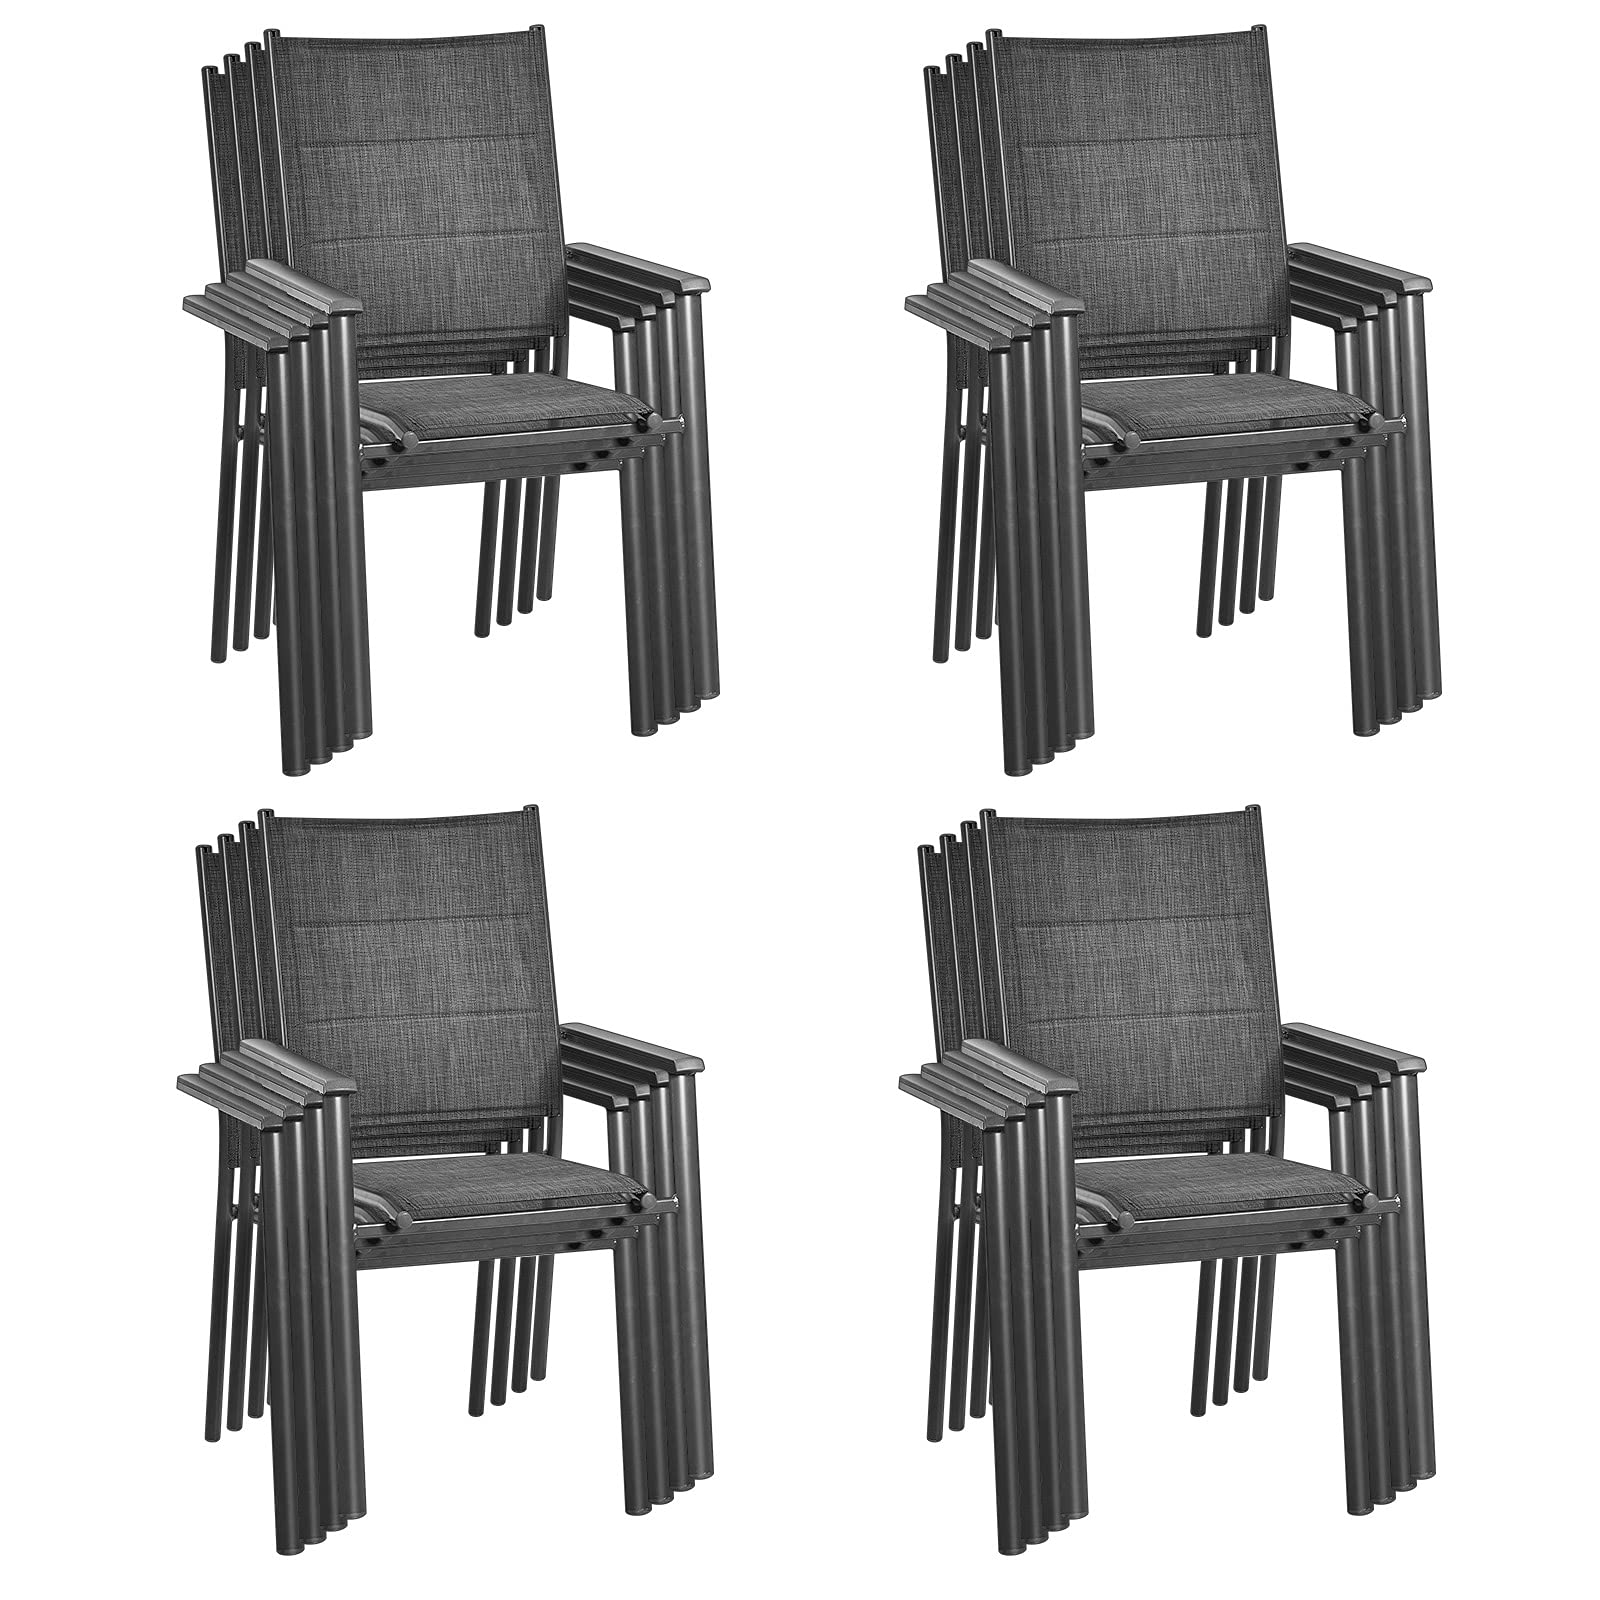 Giantex Patio Chairs, Stackable Lawn Chairs